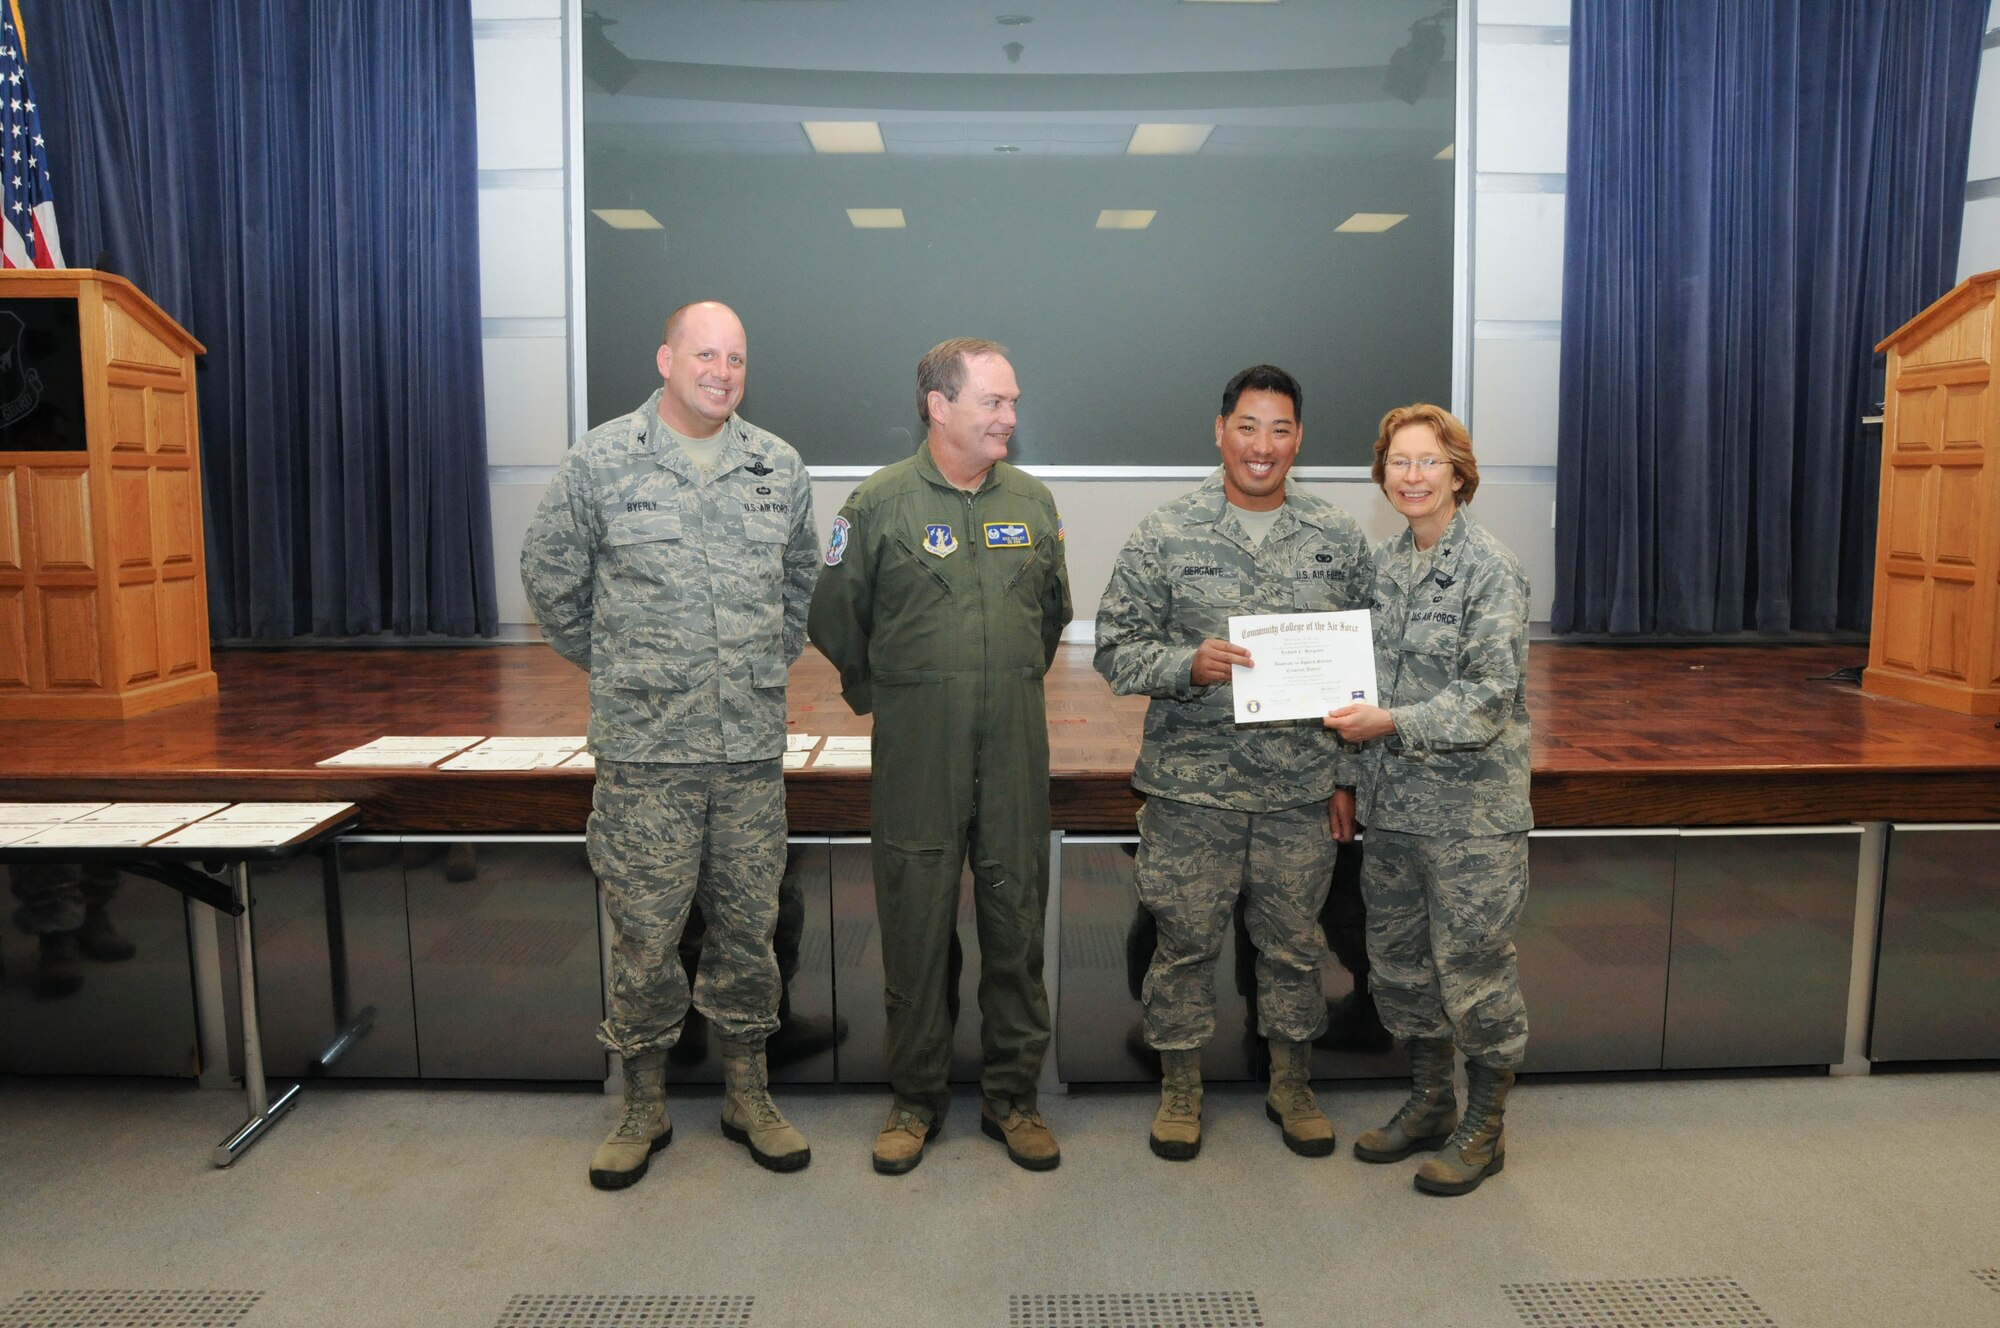 U.S. Air Force Staff Sgt. Richard Bergante, second from right, a member of the 166th Security Forces Squadron, 166th Airlift Wing, receives a certificate from Brig. Gen. Carol Timmons, assistant adjutant general for air, Delaware National Guard to recognize Bergante’s attainment of a Community College of the Air Force associate of applied science degree in criminal justice at a CCAF Class of October 2013 graduation ceremony held Nov. 3, 2013 at the New Castle Air National Guard Base, Del. 166th AW Commander Col. Mike Feeley, second from left, is next to 166th AW Vice-Commander Col. Dave Byerly, left. (U.S. Air National Guard photo by Tech. Sgt. Robin Meredith)